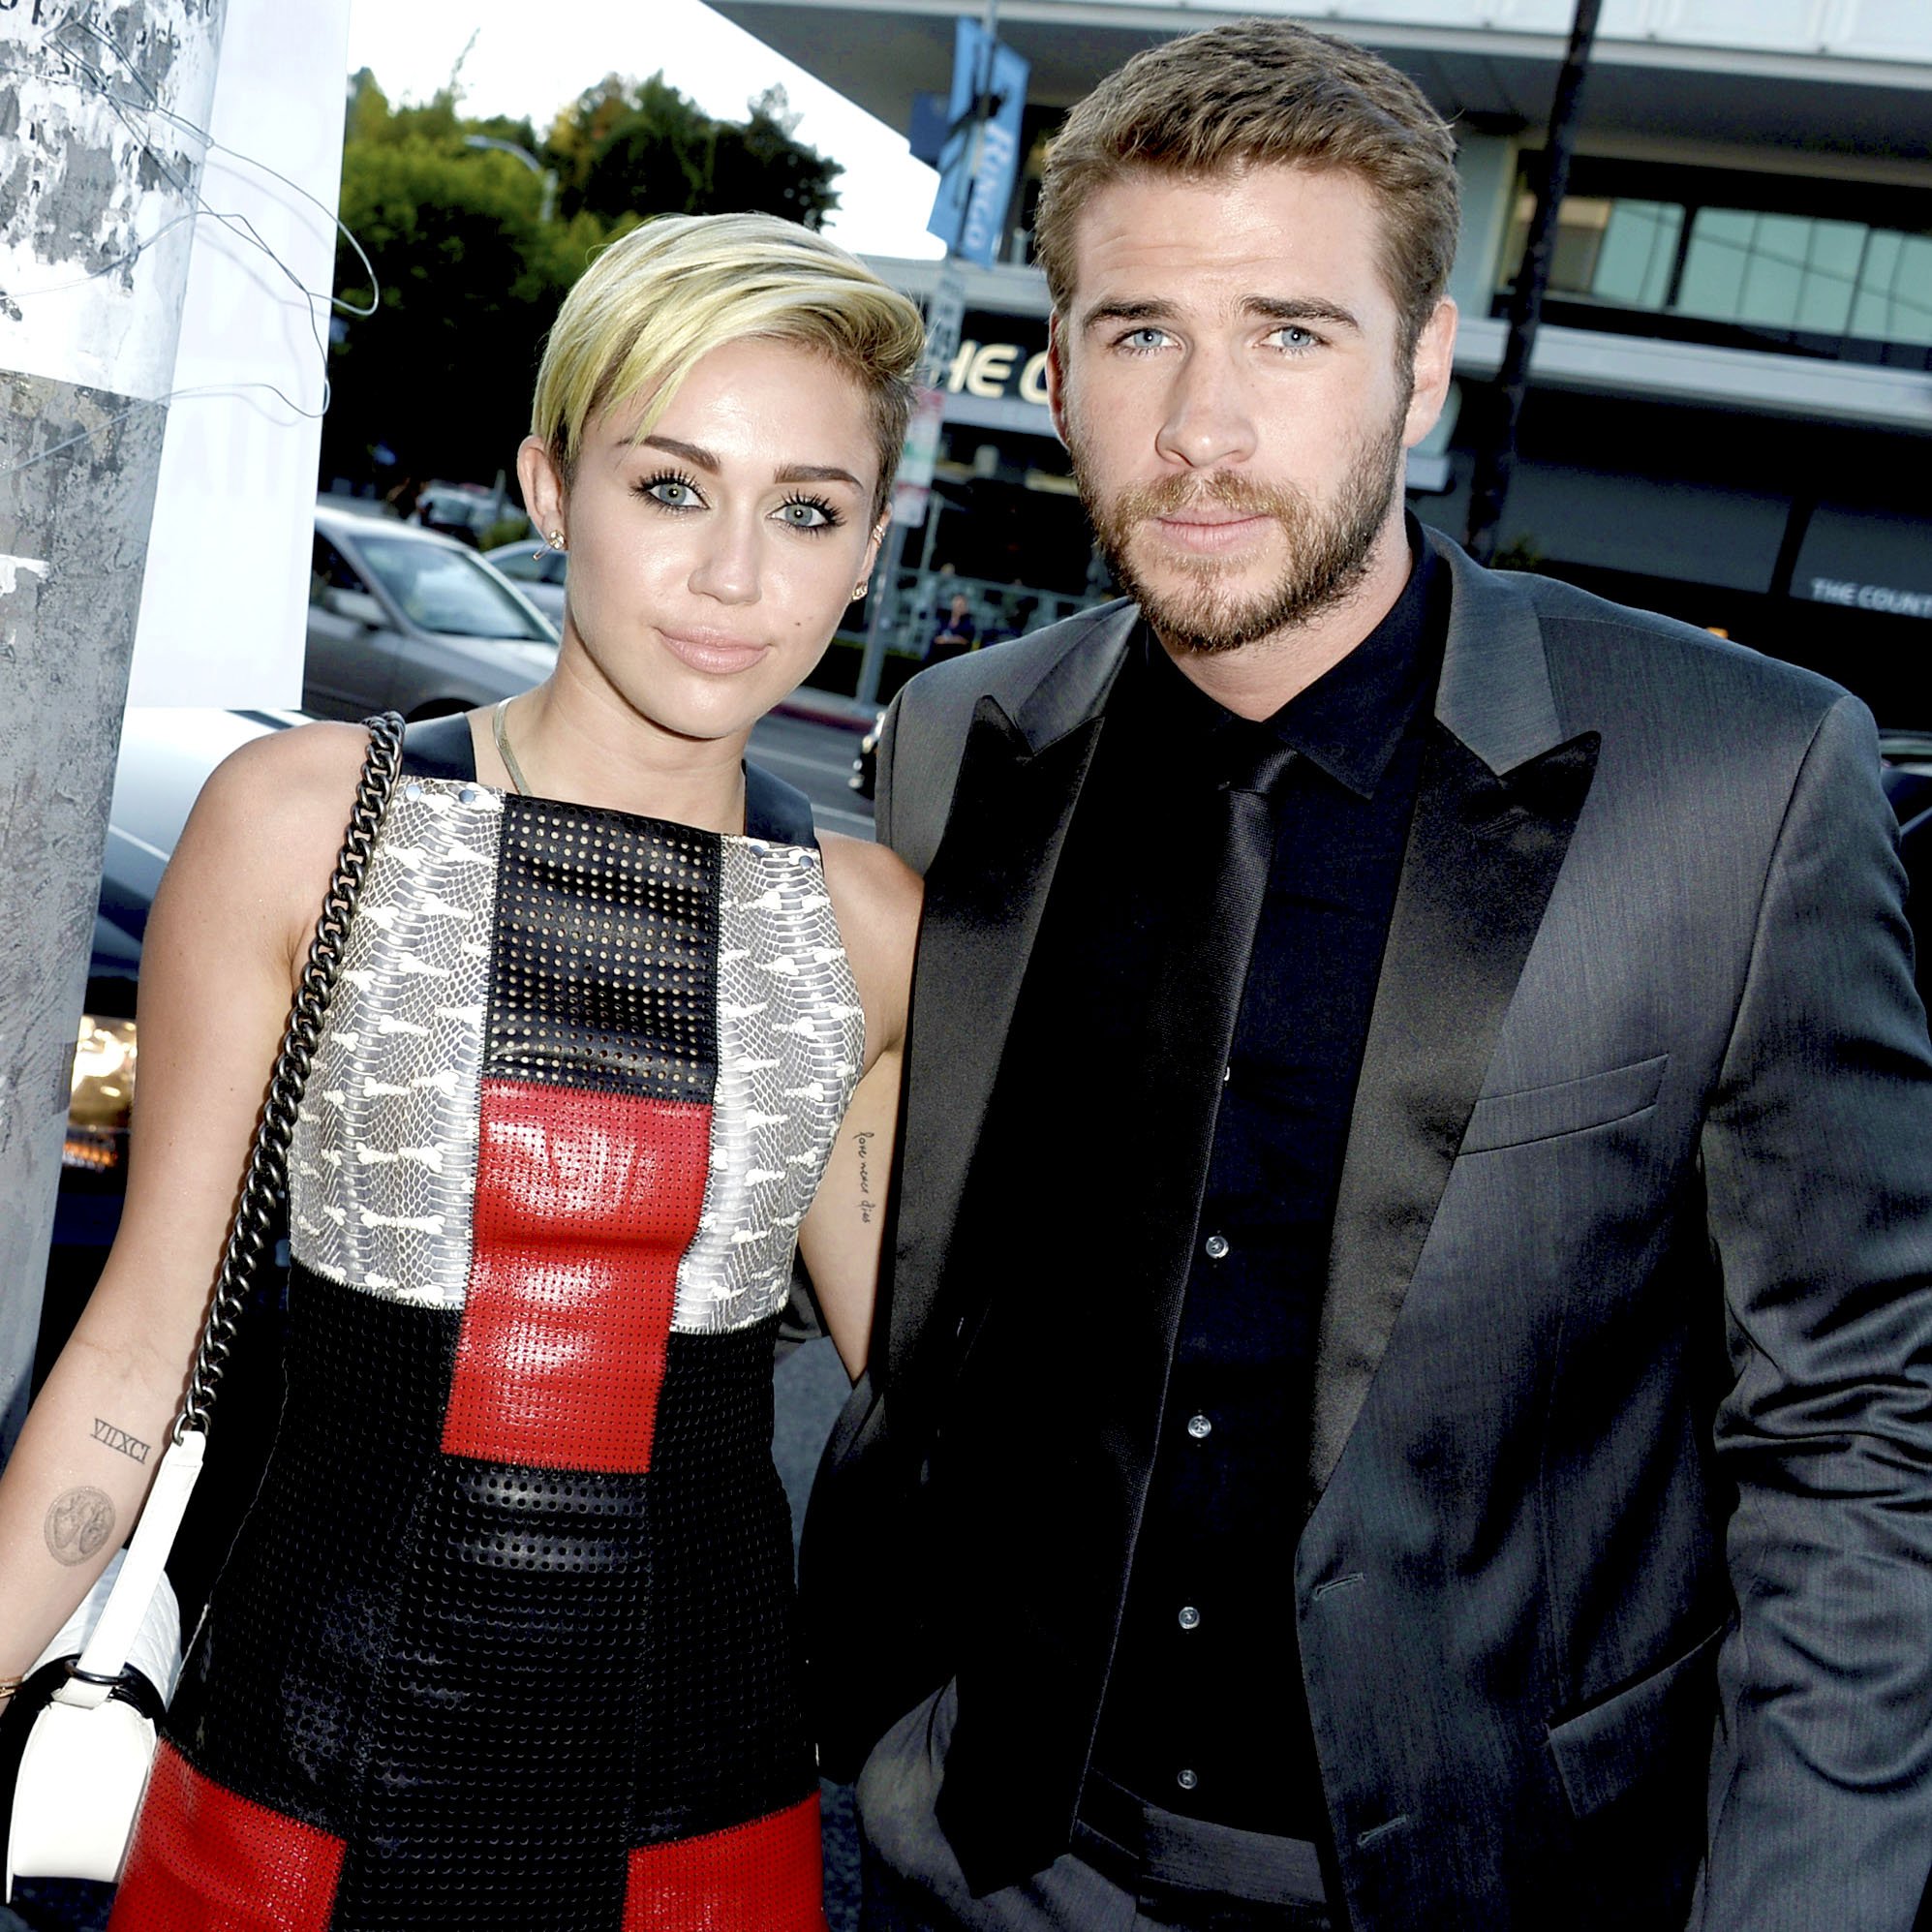 Together miley and liam Are Miley